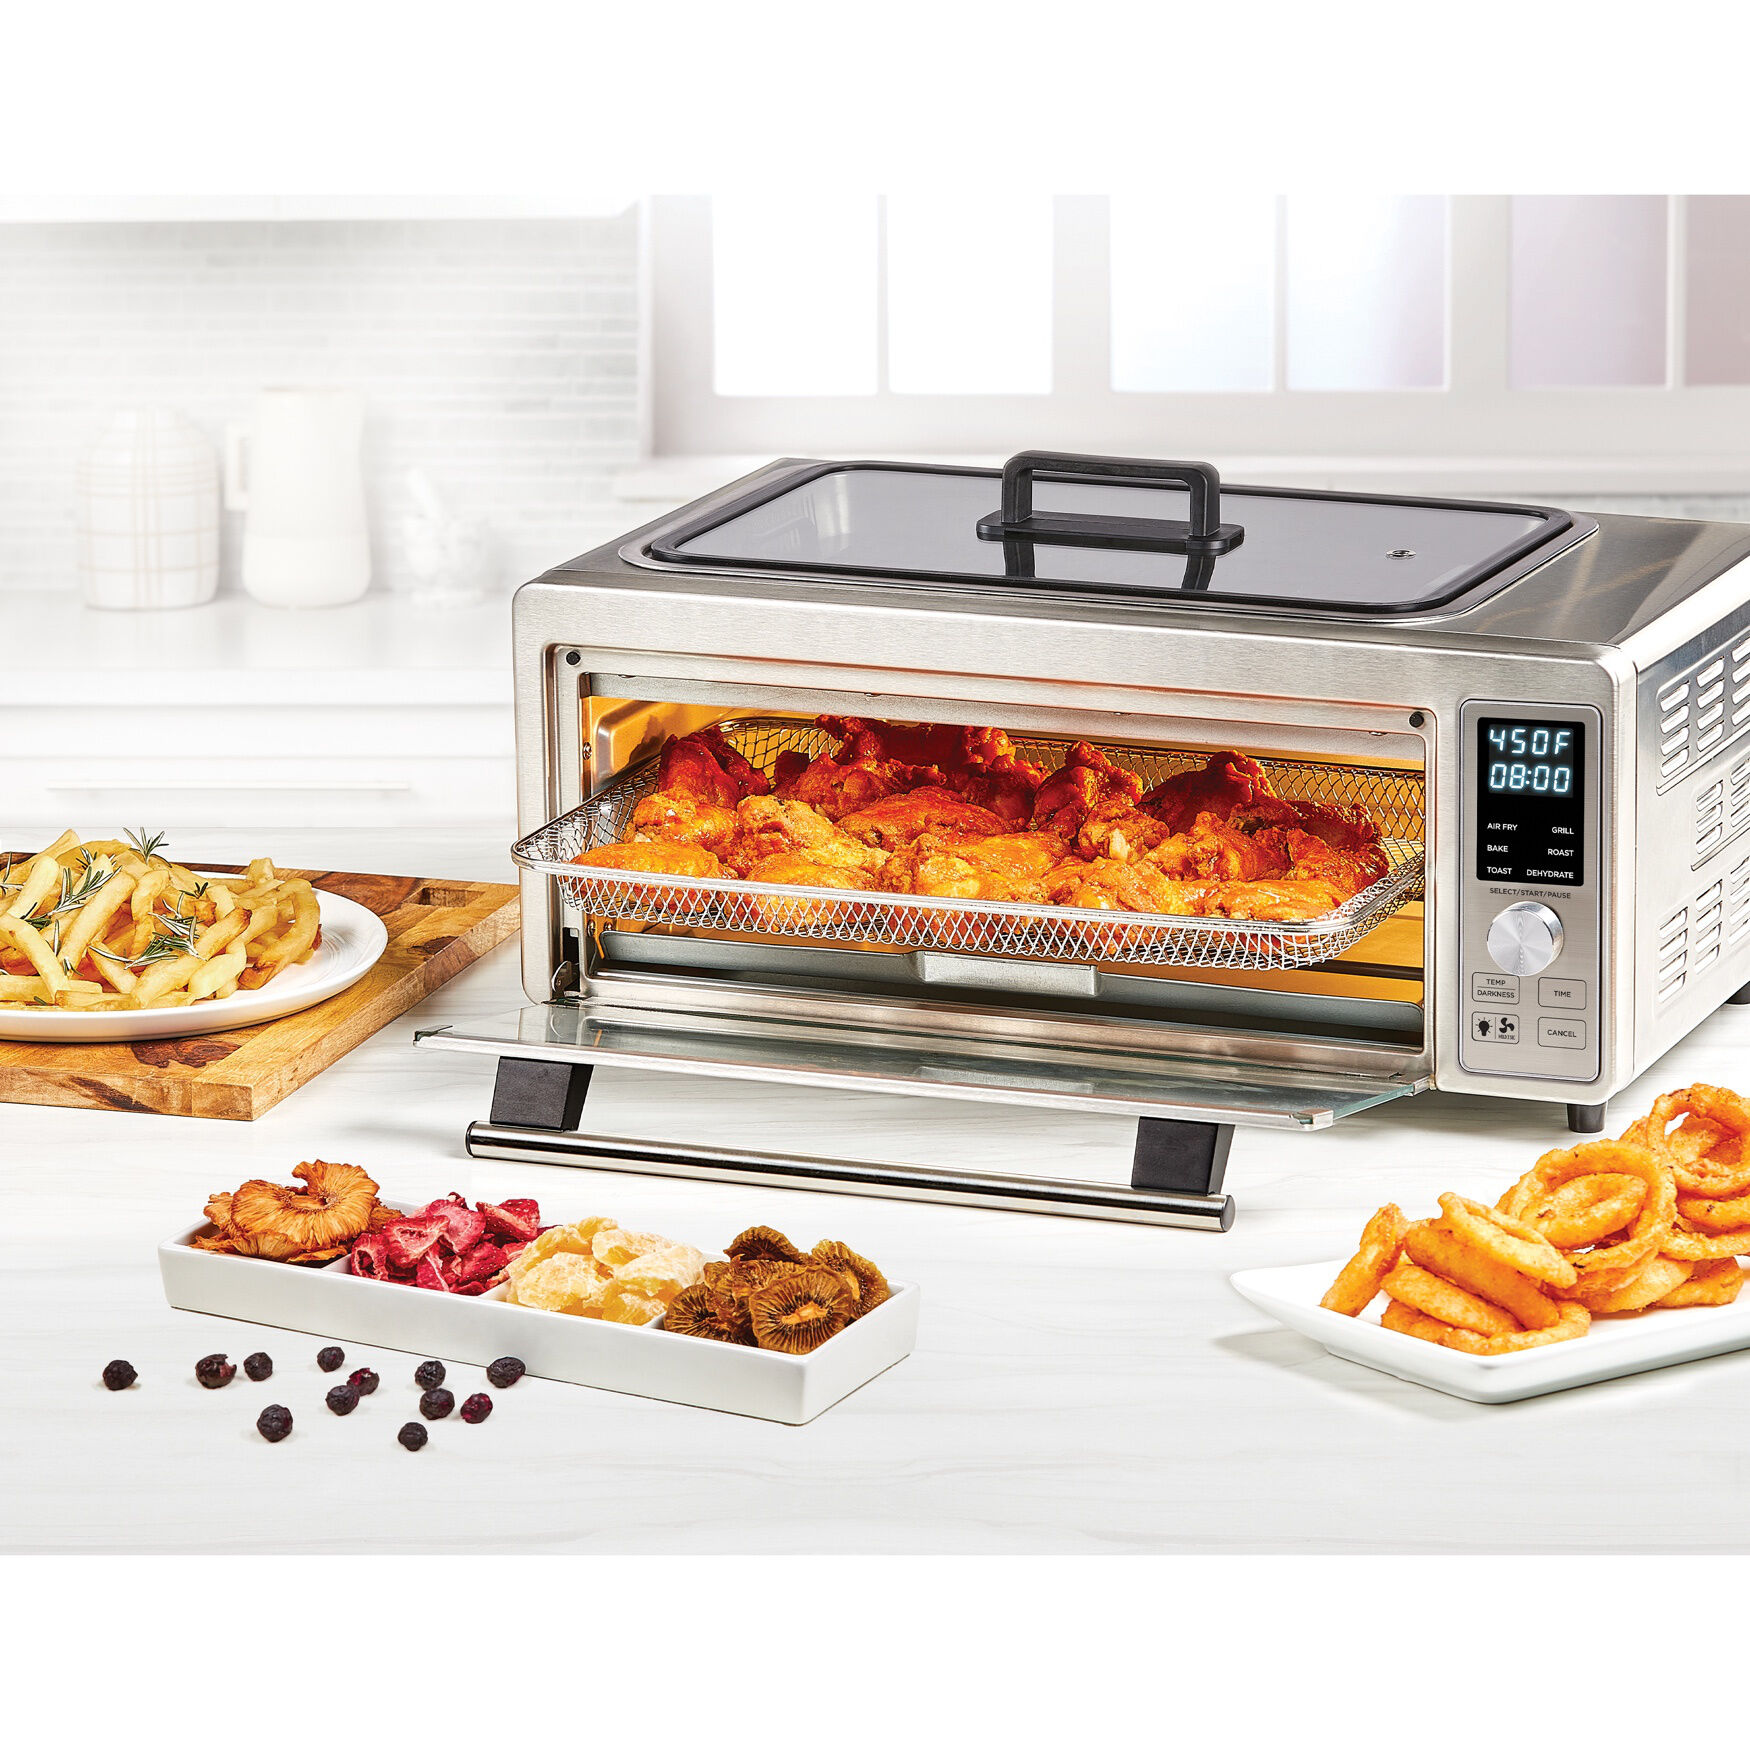 Brylanehome Double Door Convection Oven, Stainless 